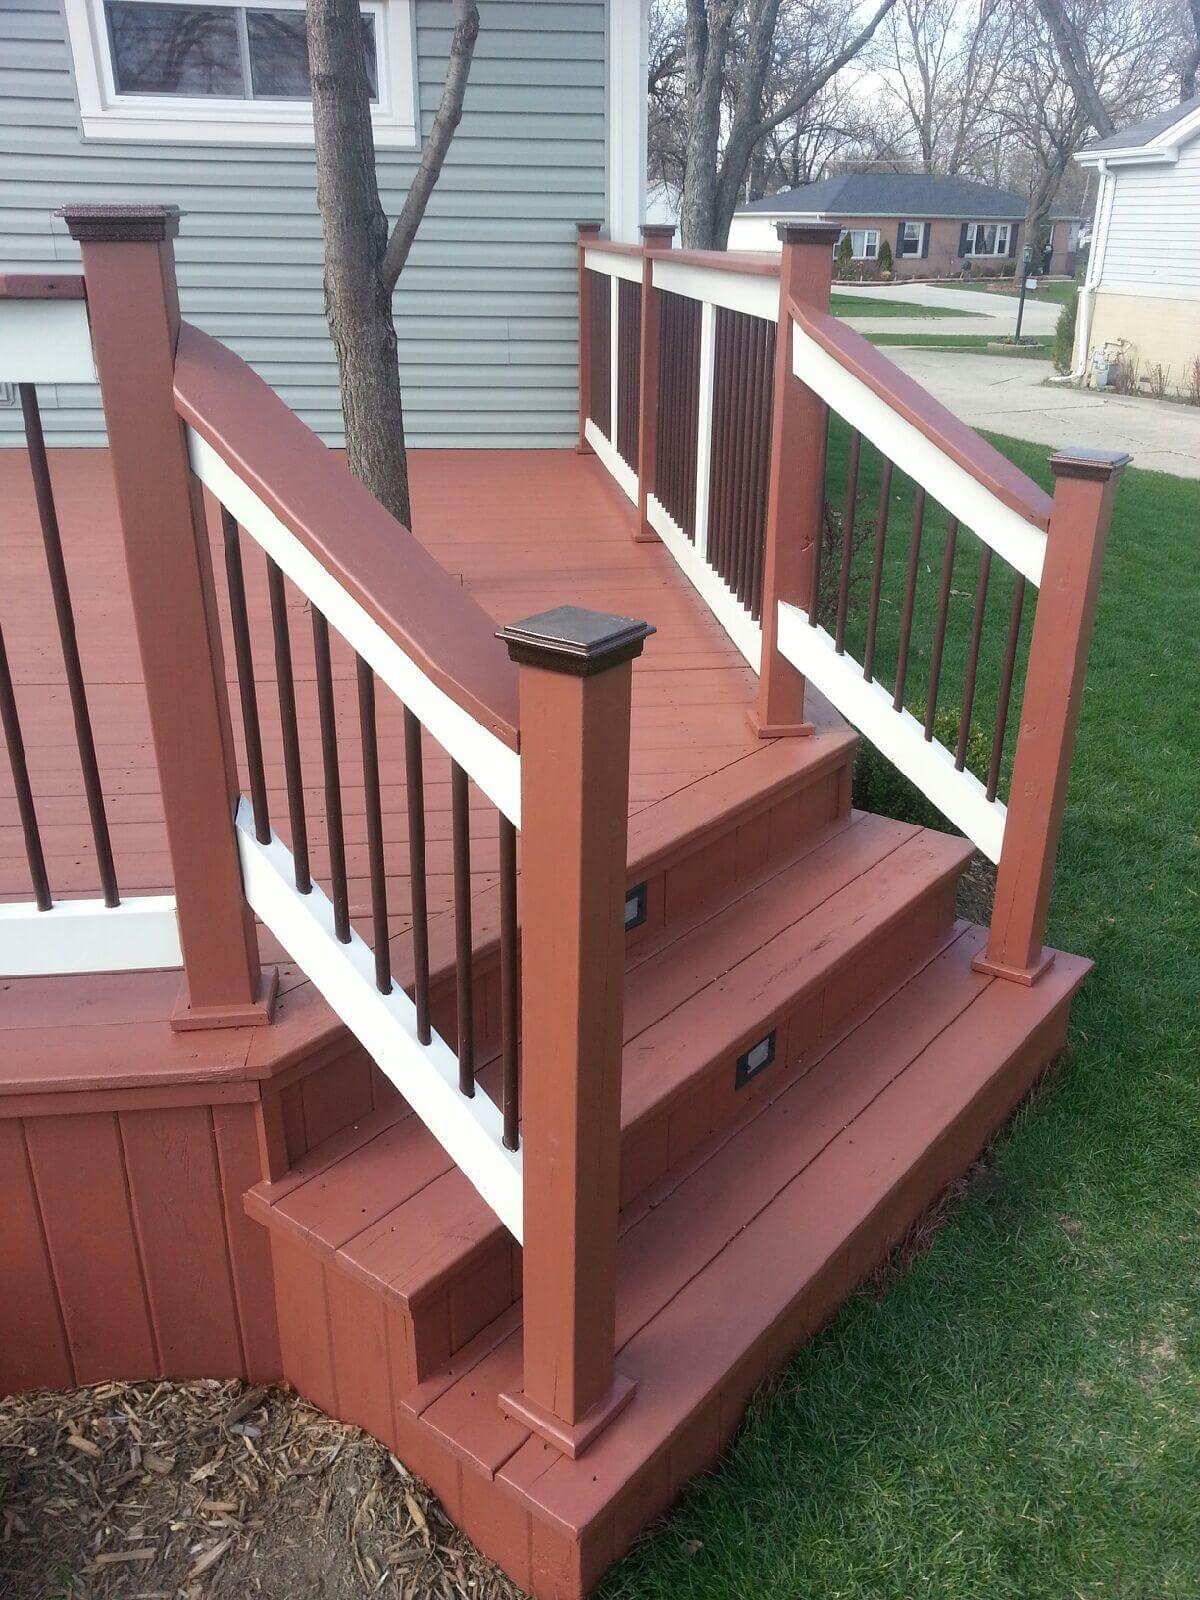 Repairs and maintenance for your deck, fence, and exterior wood staining. - Deck Staining West Dundee - Deck Cleaning Services